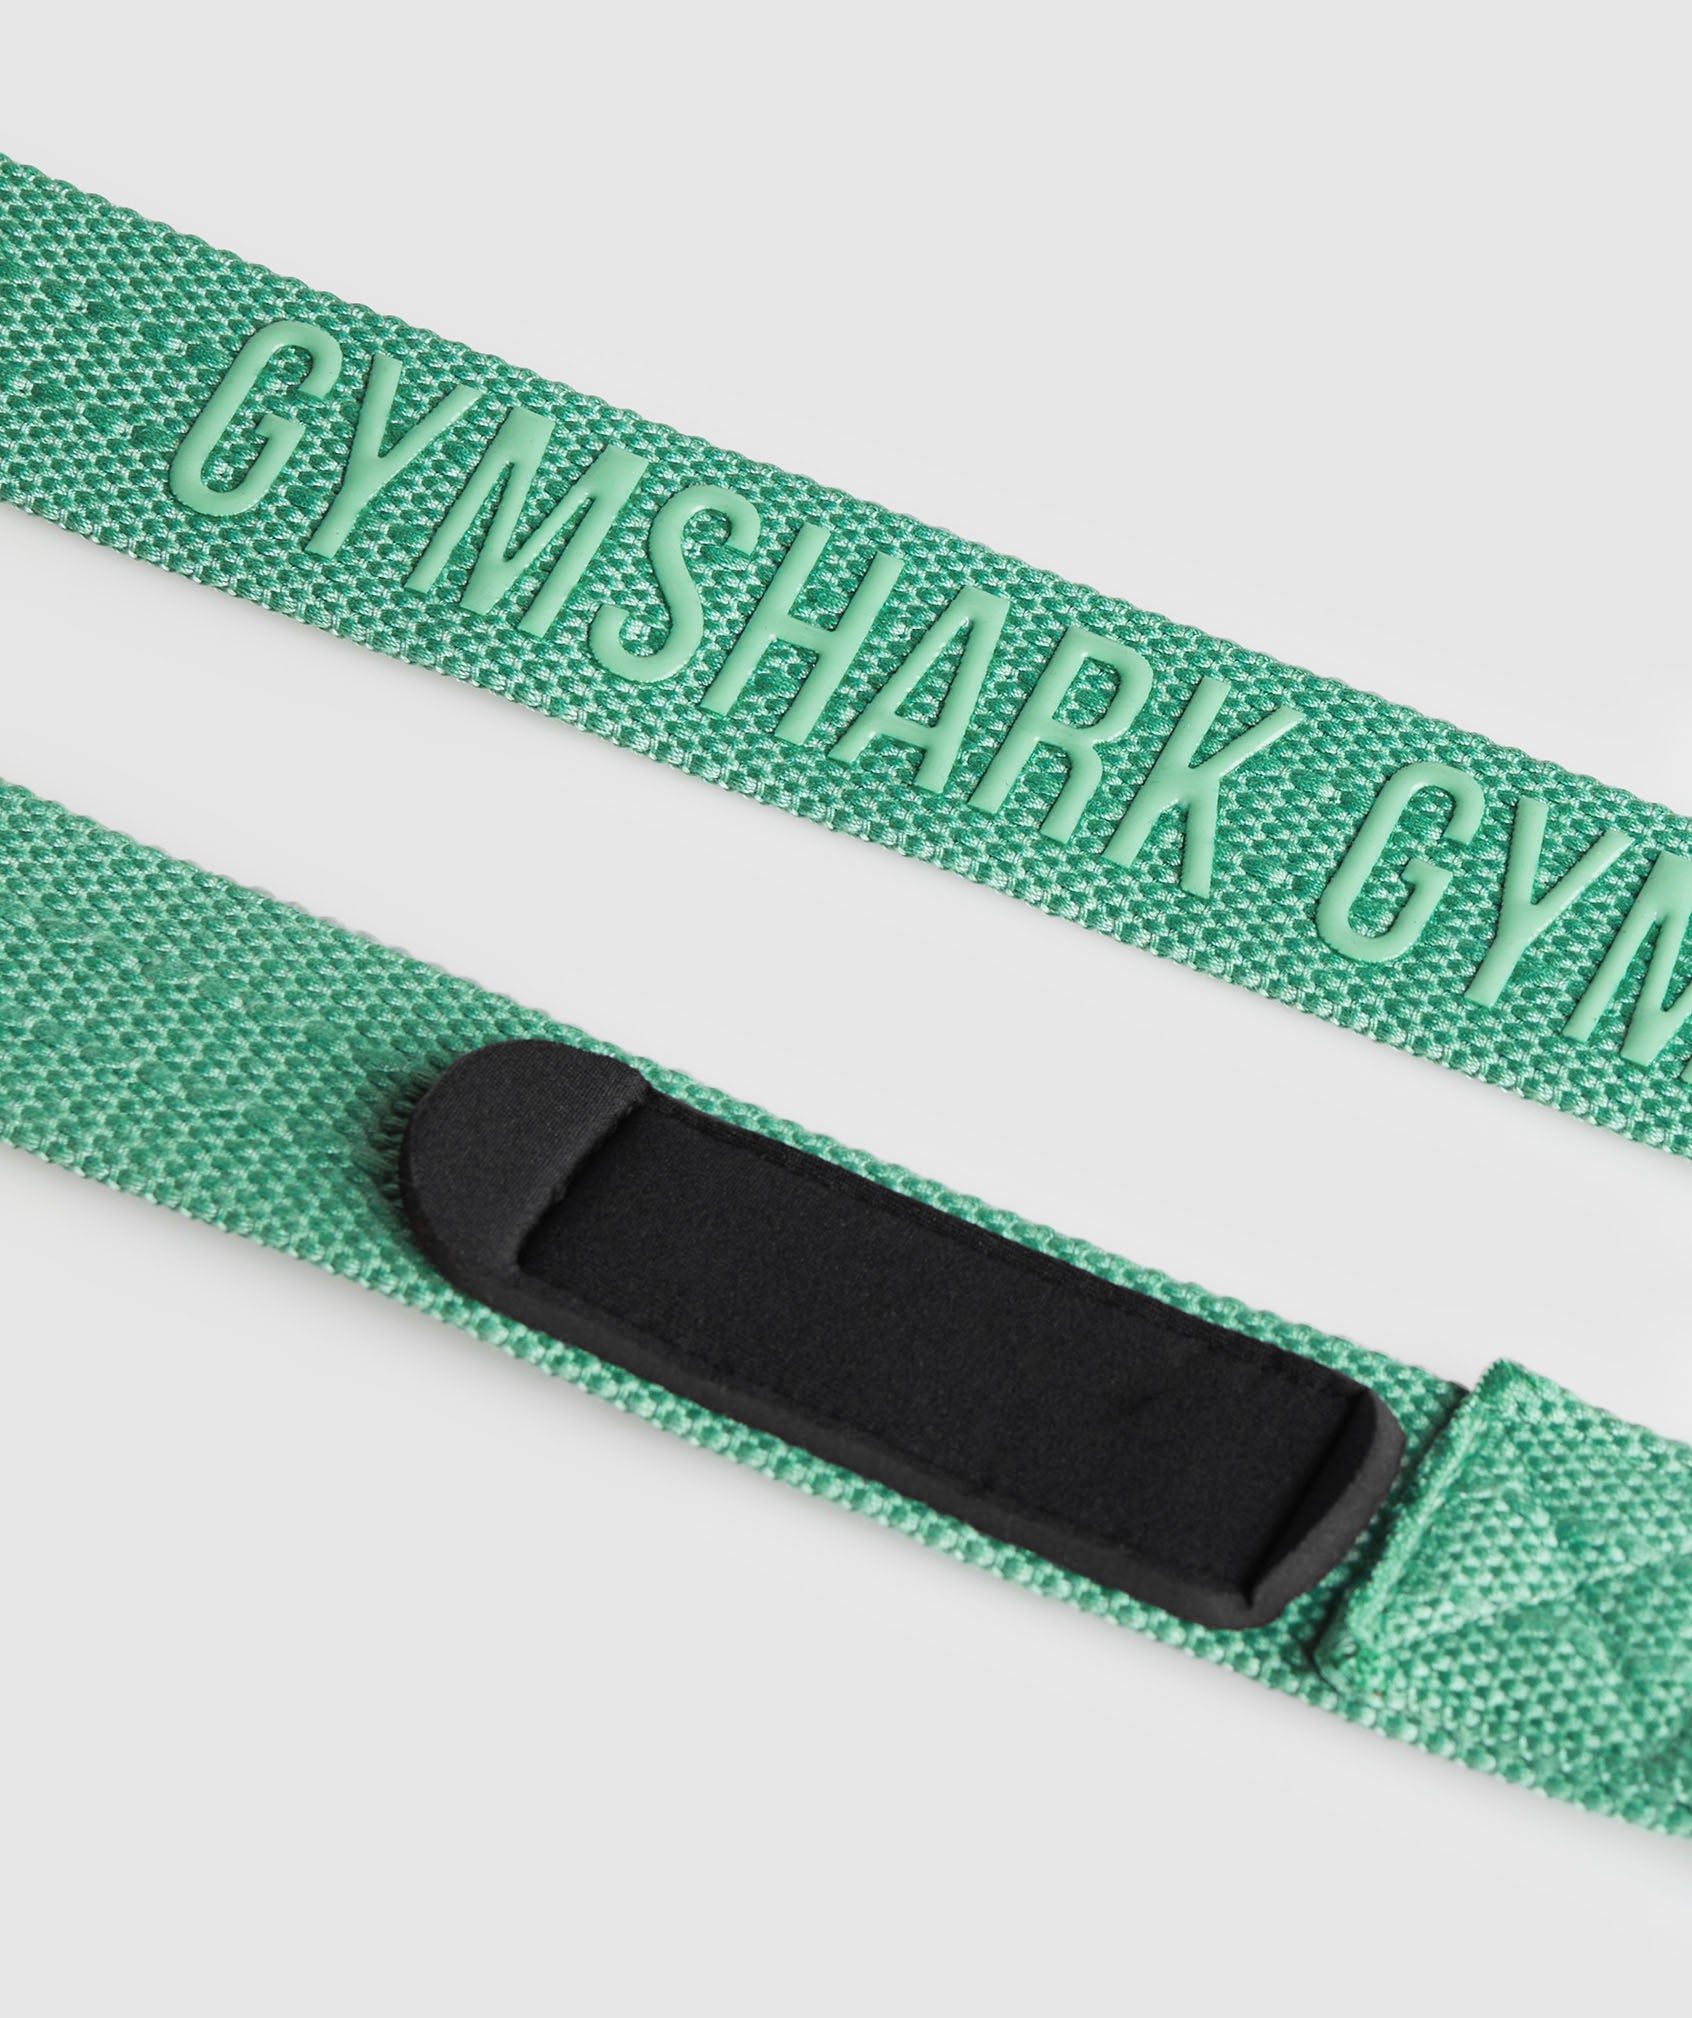 Silicone Lifting Straps in Lagoon Green - view 3